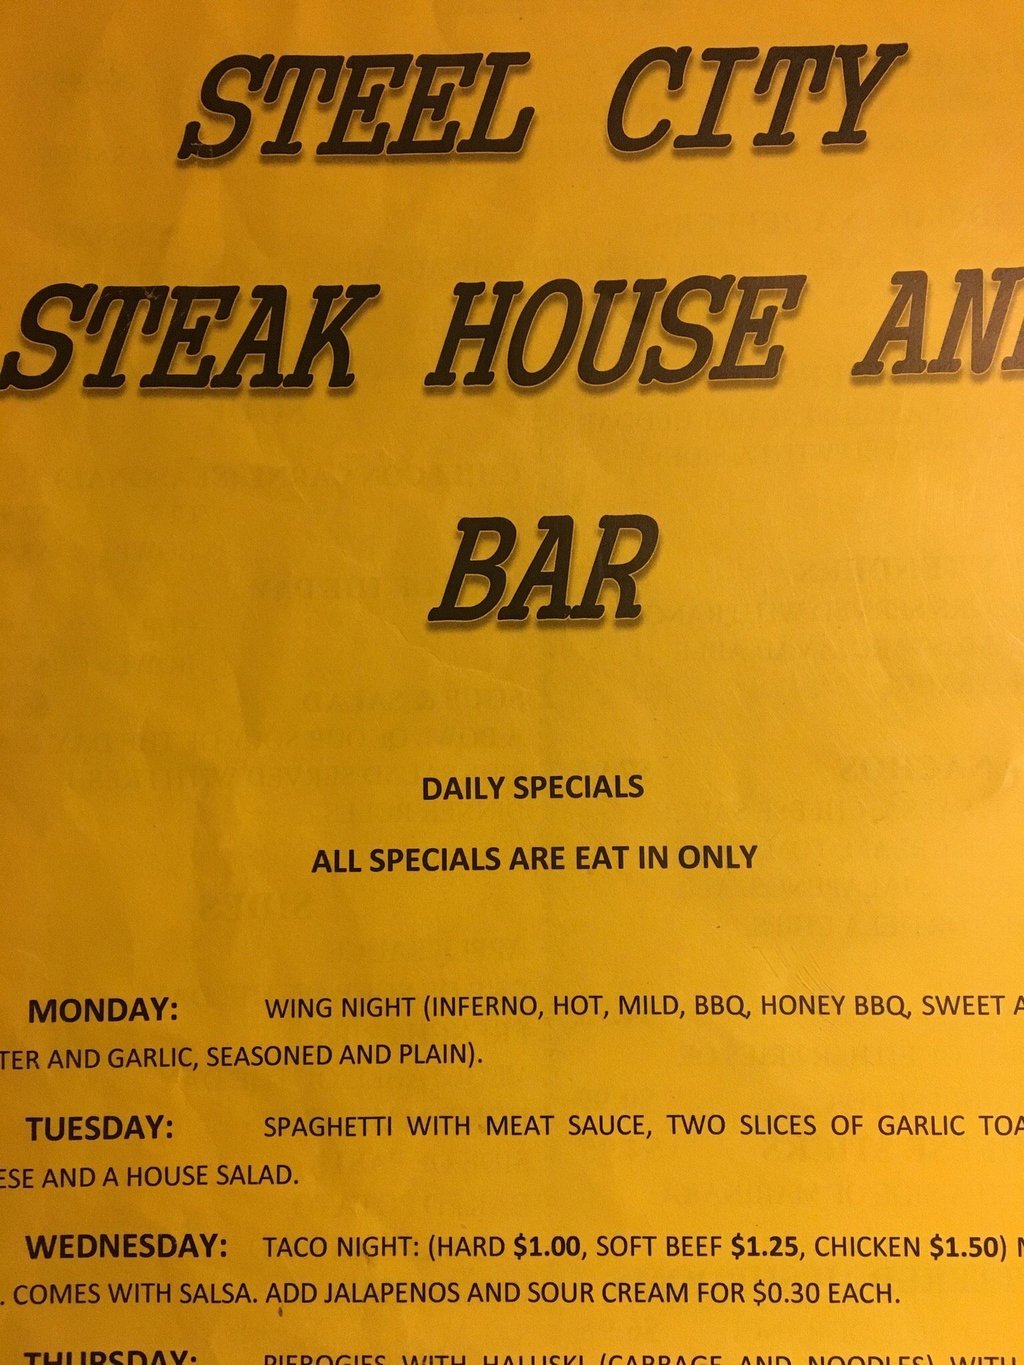 Steel City Steakhouse and Bar